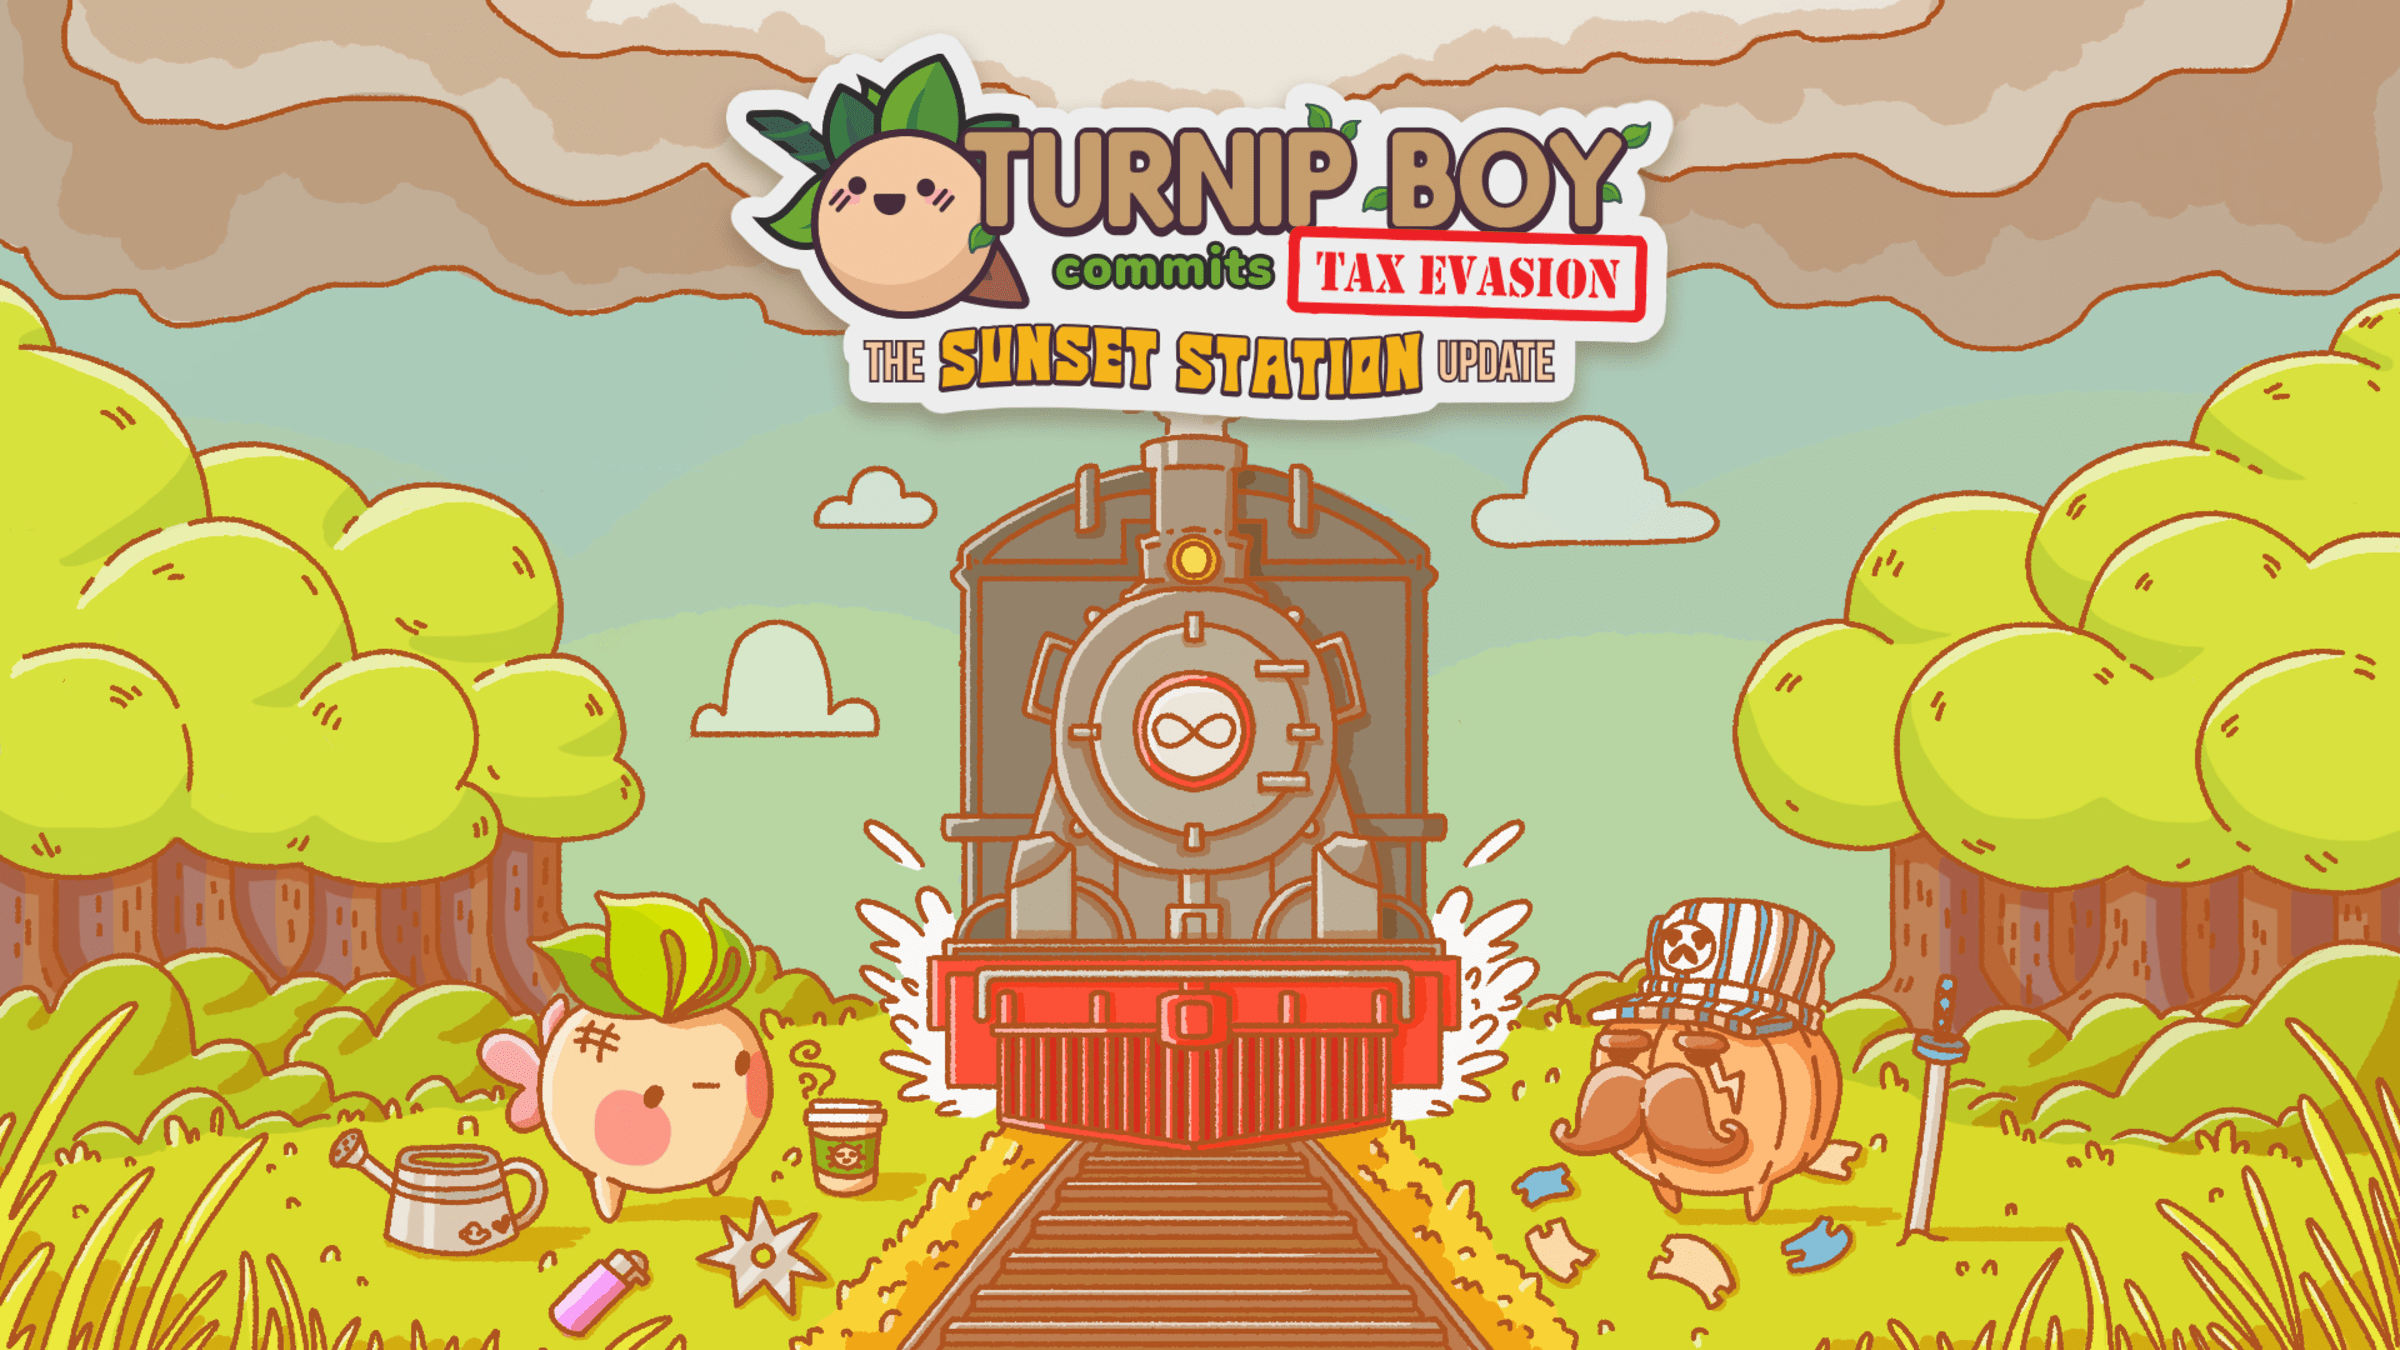 for Turnip Tax Site Commits Nintendo Evasion Nintendo Boy - Switch Official